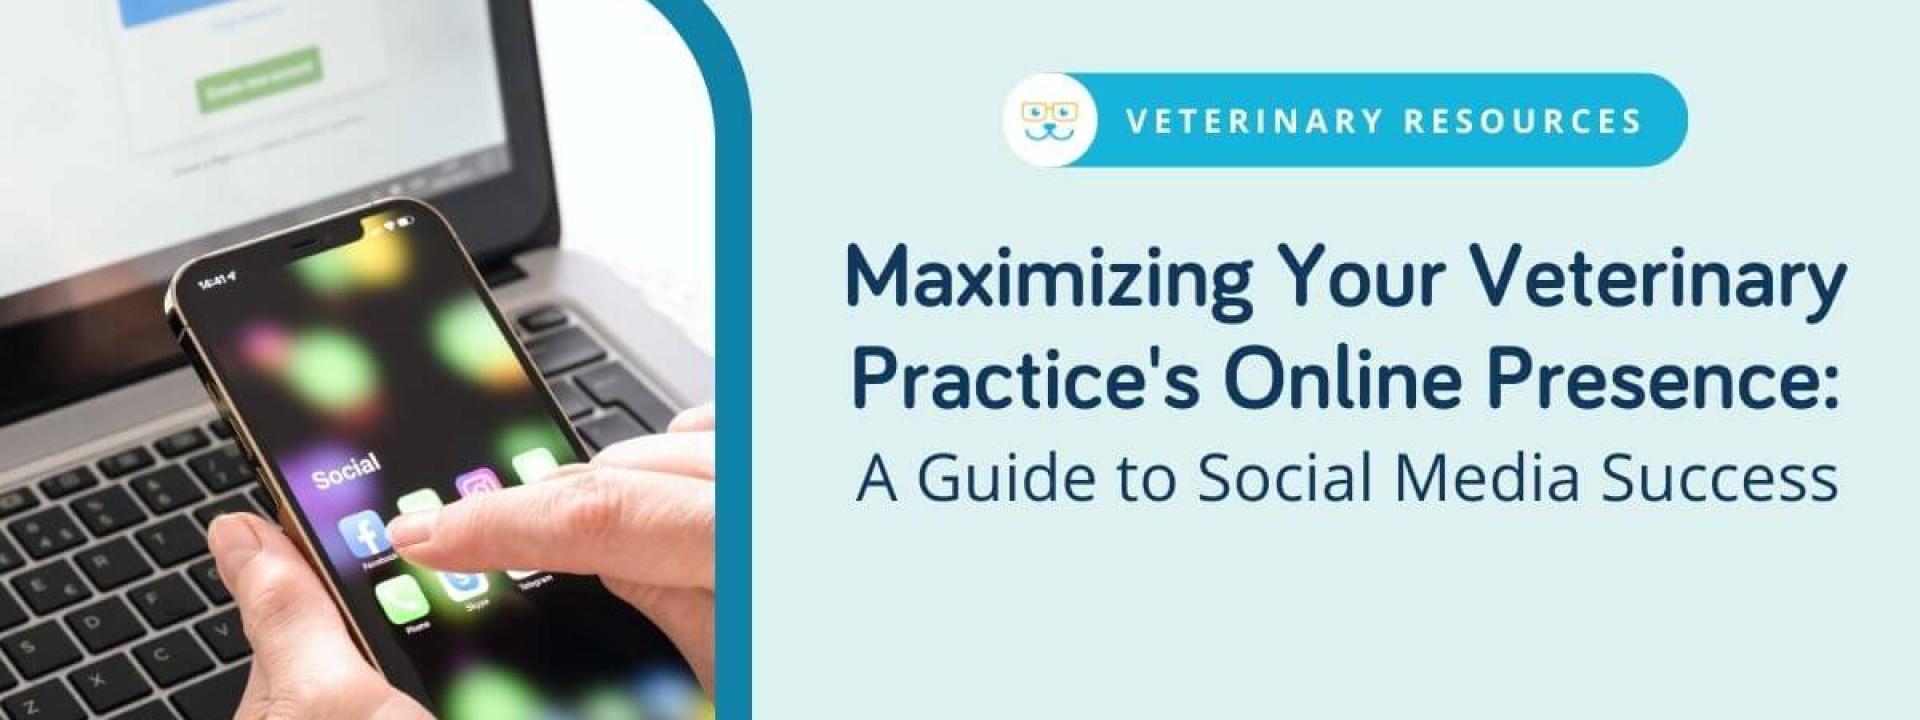 Maximizing Your Veterinary Practice's Online Presence: A Guide to Social Media Success